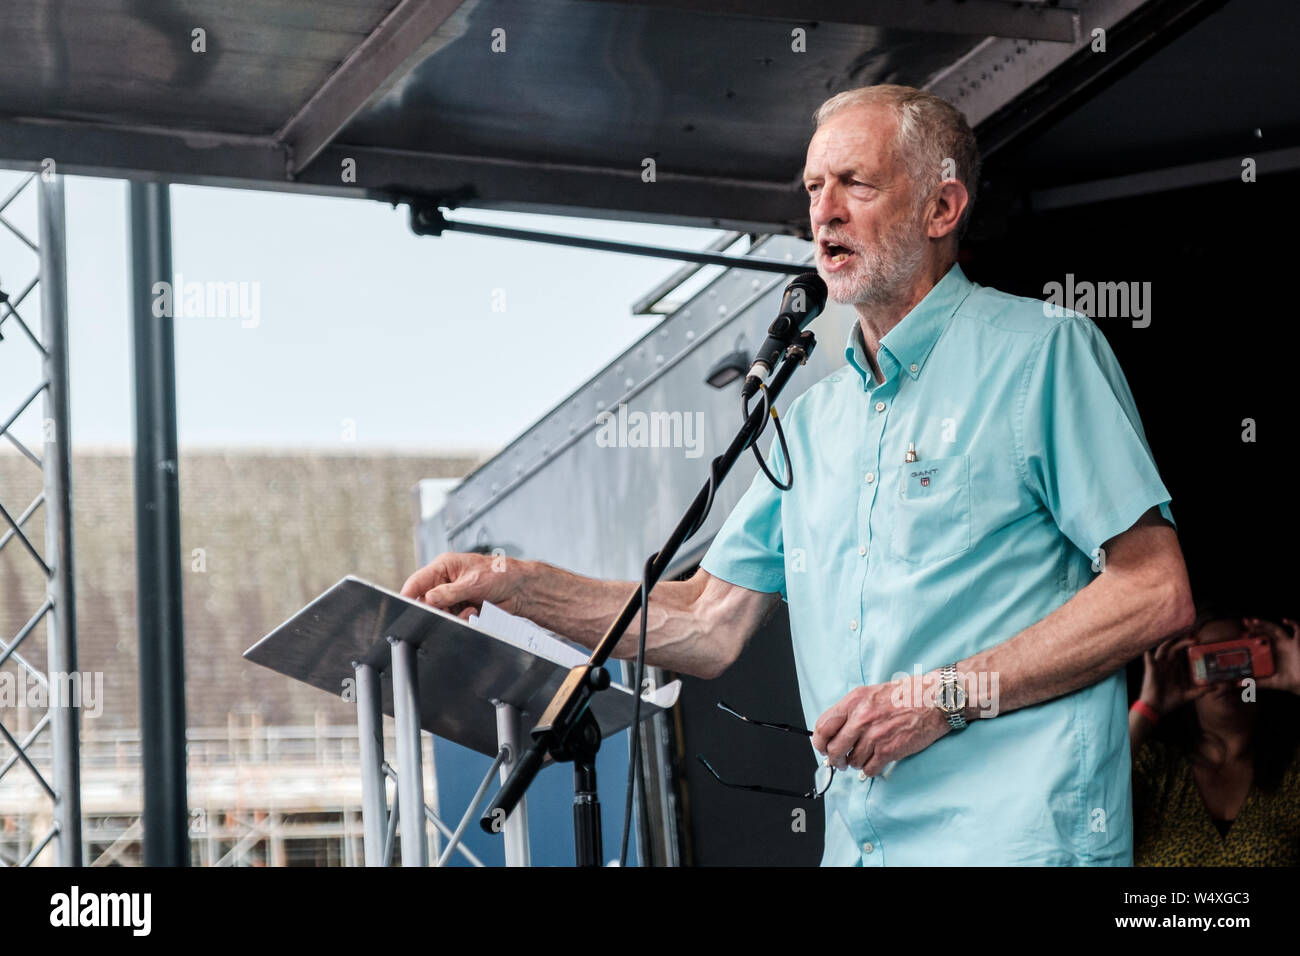 Labour Party leader Jeremy Corbyn addresses a crowd gathered outside parliament in London to call for a general election in response to Boris Johnson's appointment as the new leader of the Conservative party and British Prime Minister. Stock Photo